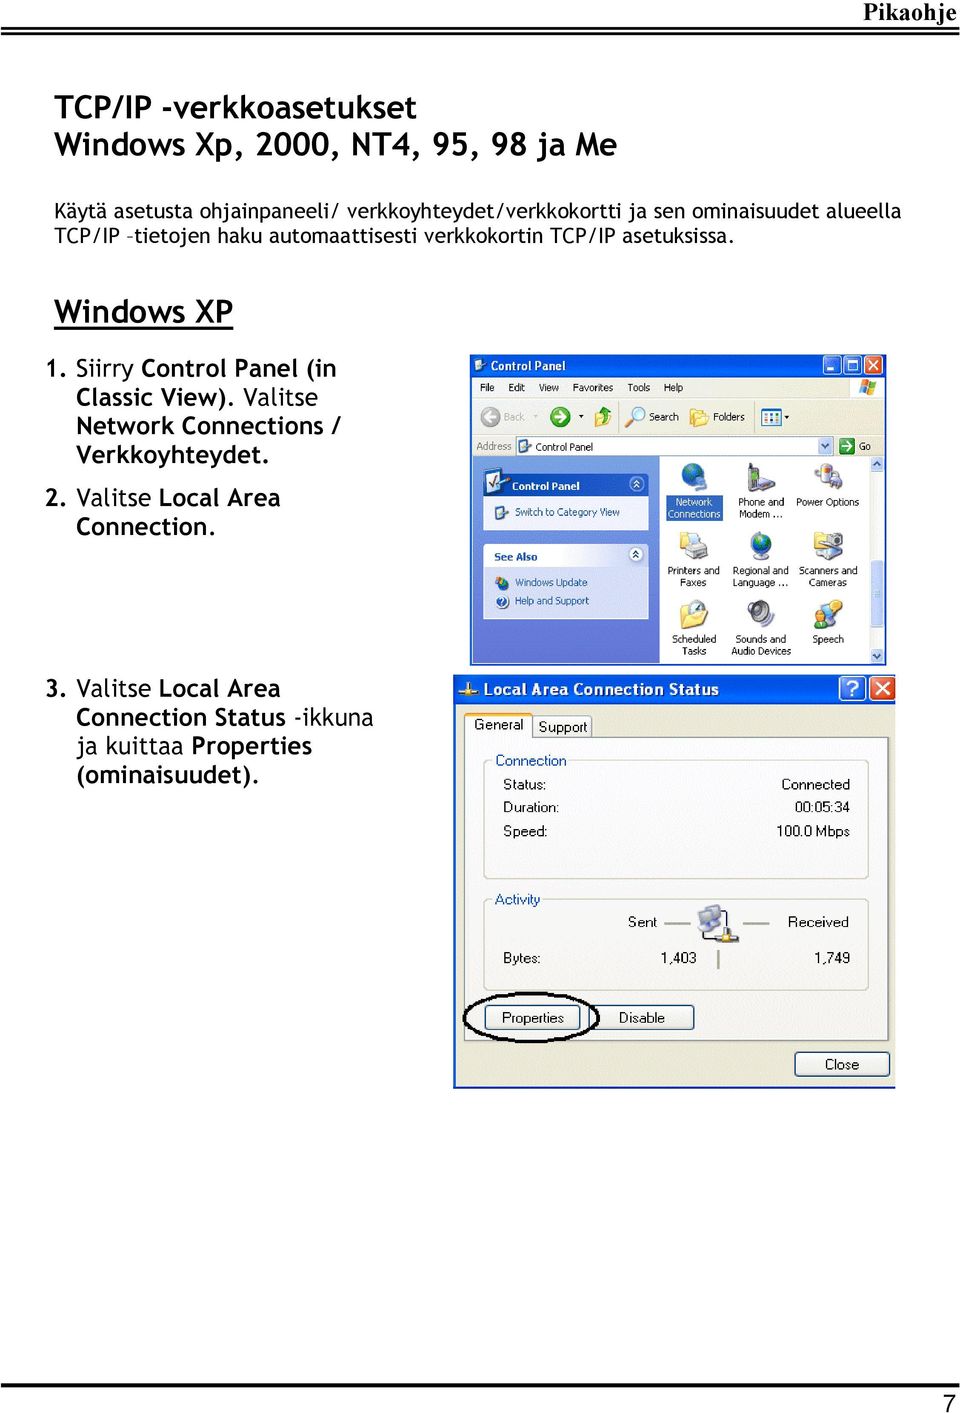 TCP/IP asetuksissa. Windows XP 1. Siirry Control Panel (in Classic View).